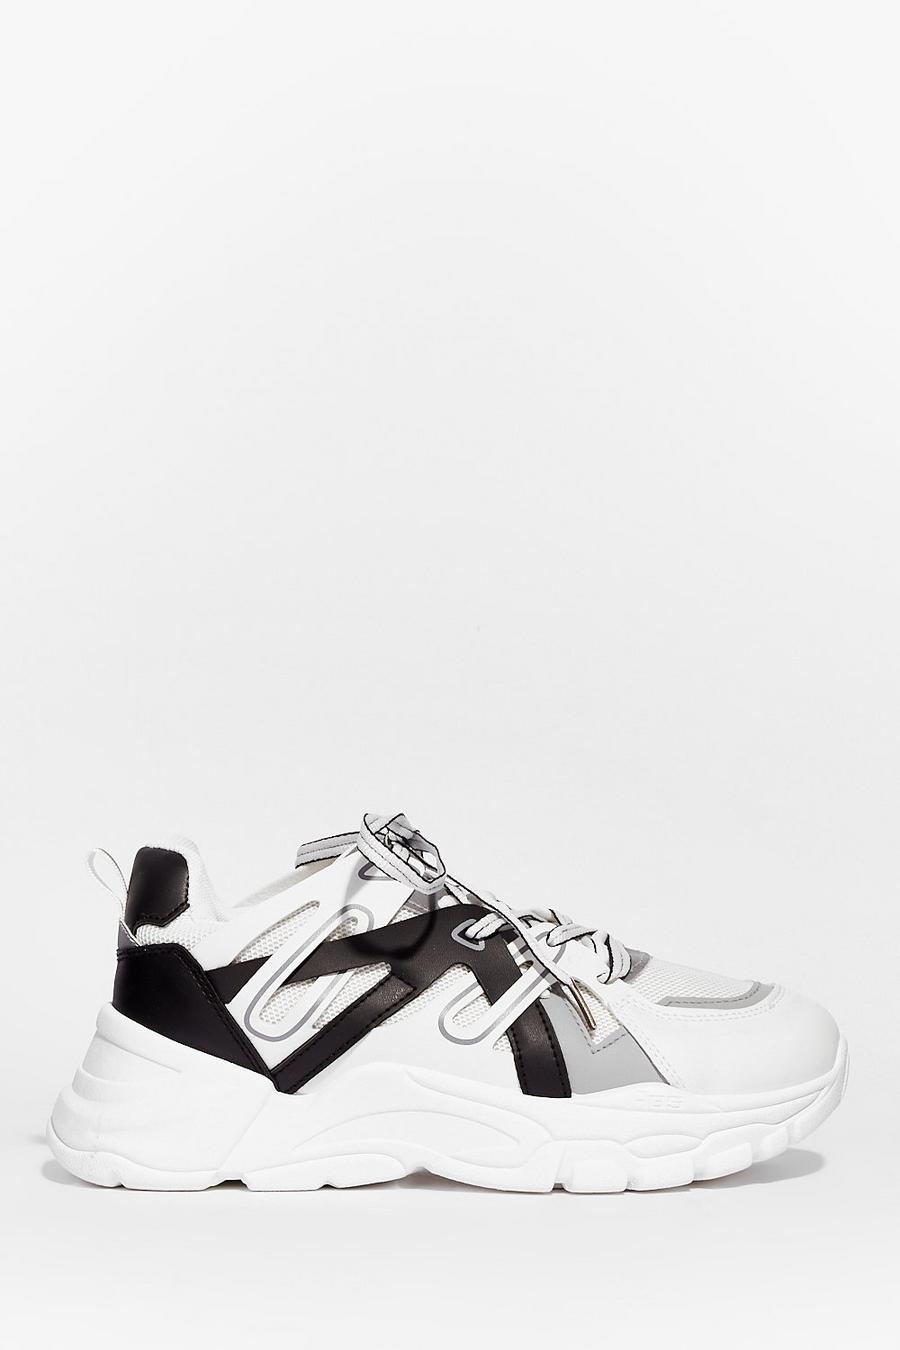 In and Out Contrasting Chunky Sneakers